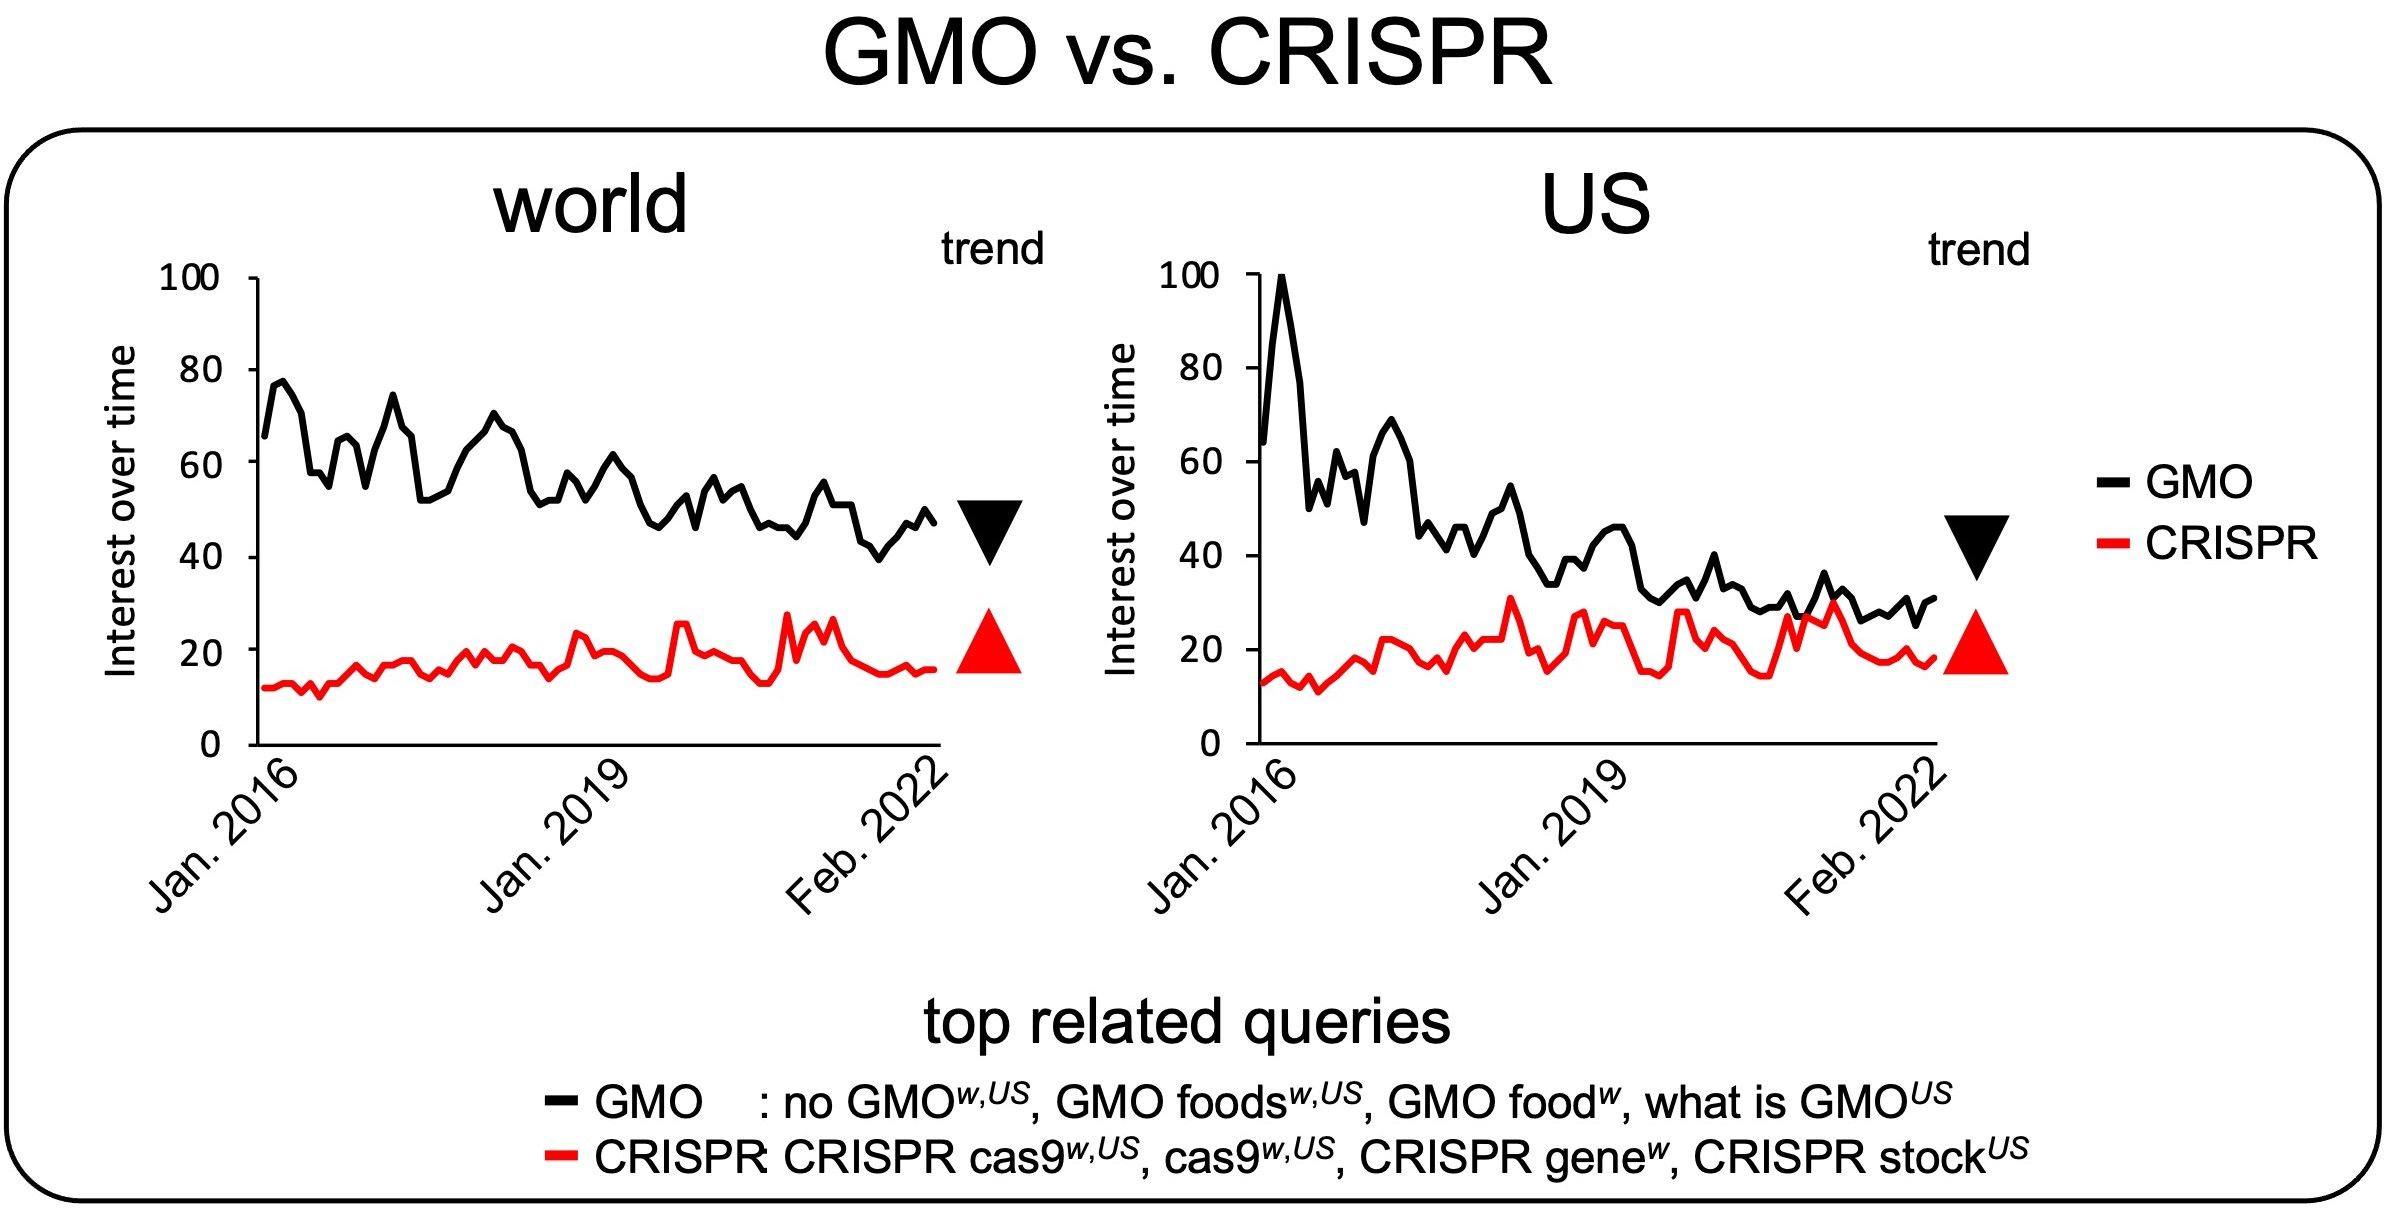 A comparison of search trends between “GMO” and “CRISPR.” Ascending or descending triangles are shown if the change in search interest was statistically significant. Each triangle is color-coded based on the figure legend. Superscripts w and US indicate the top related queries in the world and the US, respectively.